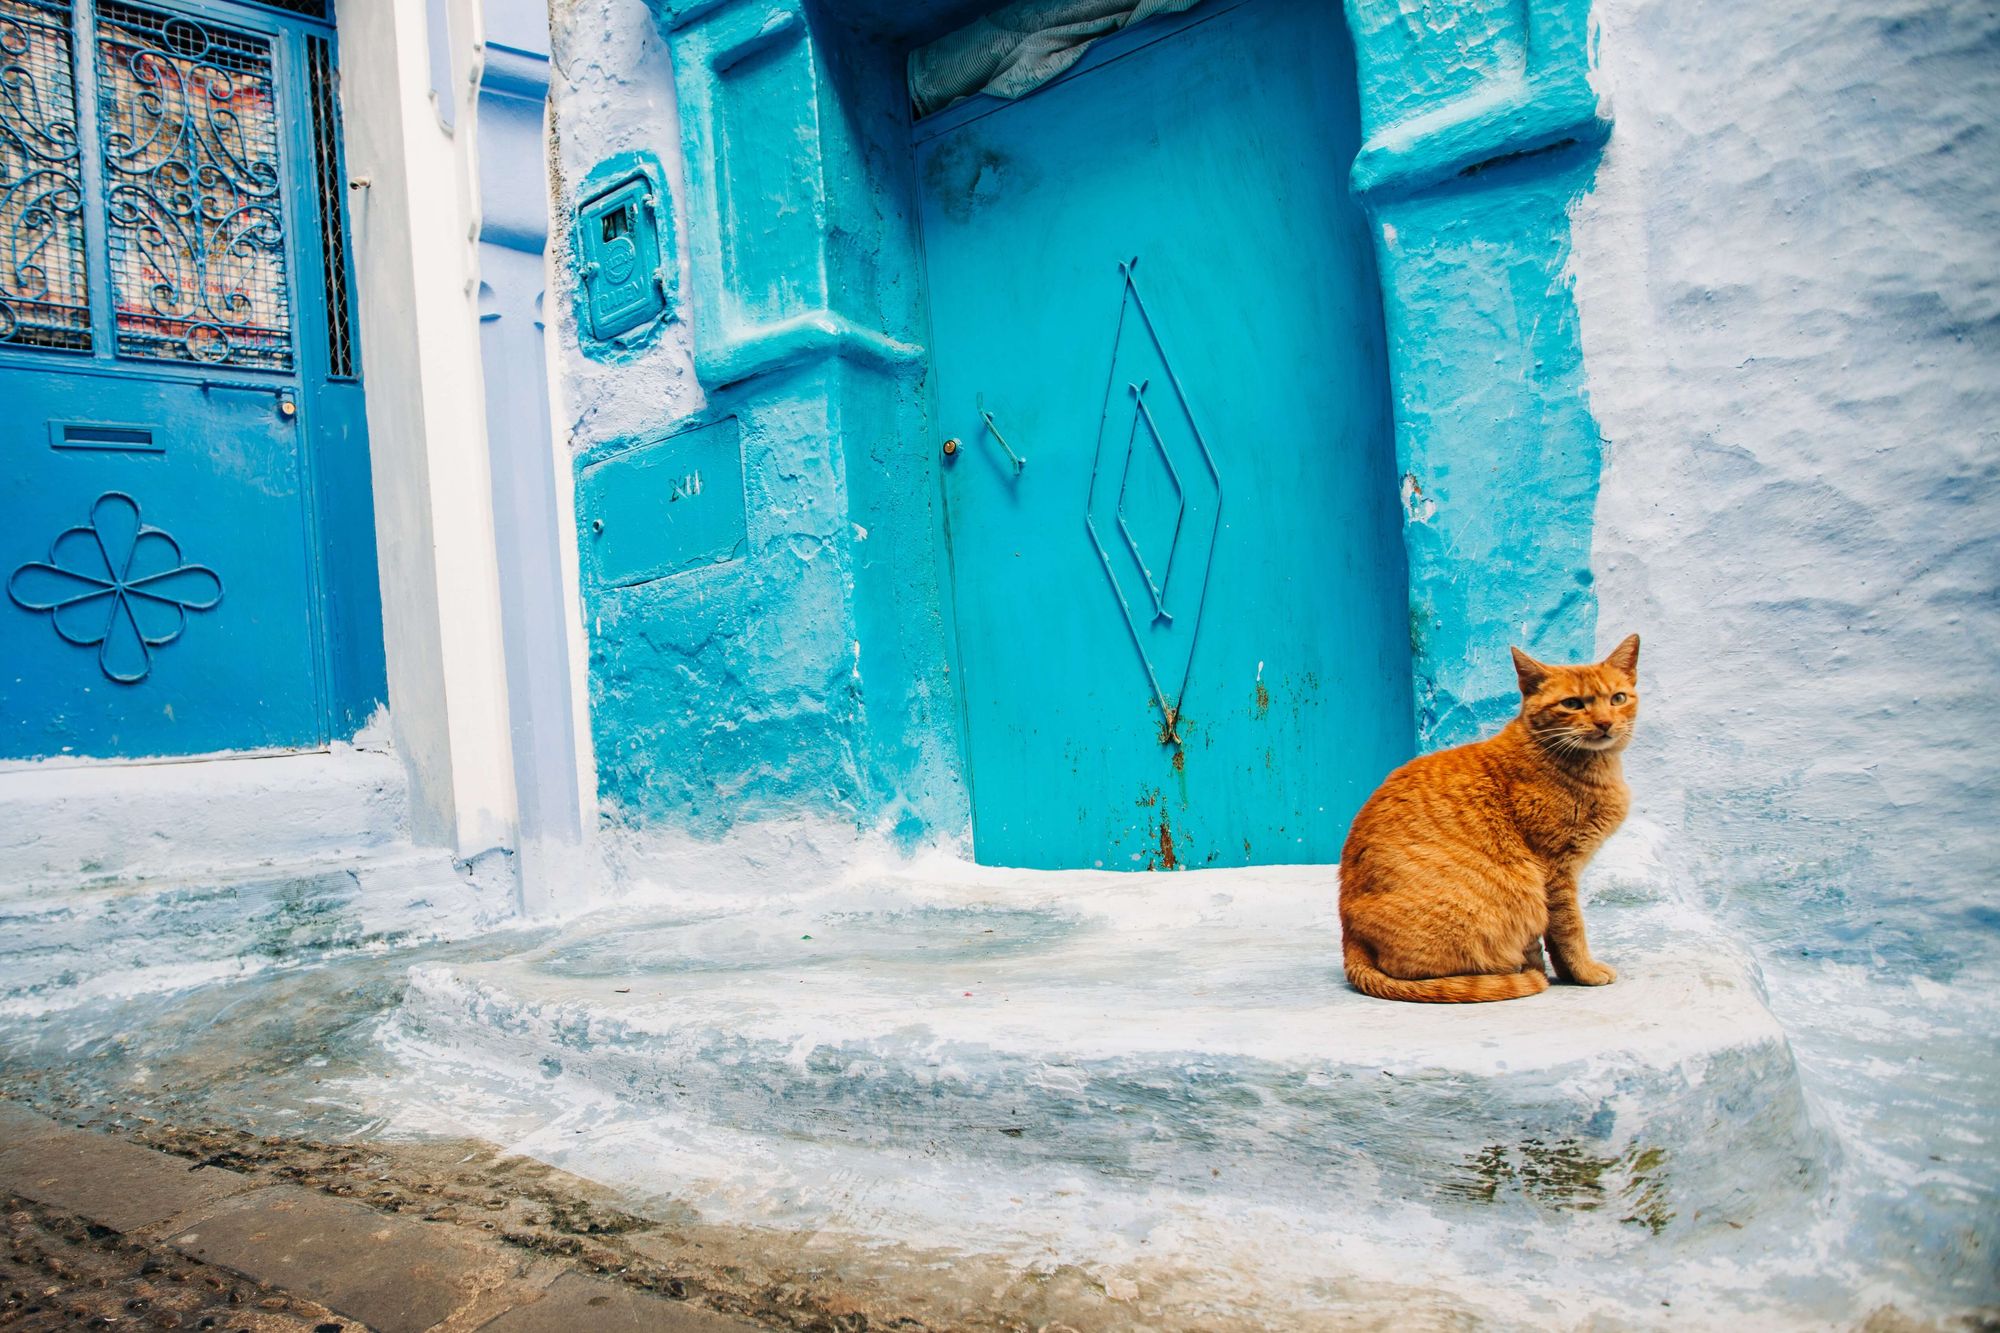 A cat sitting next to a blue door in Morocco